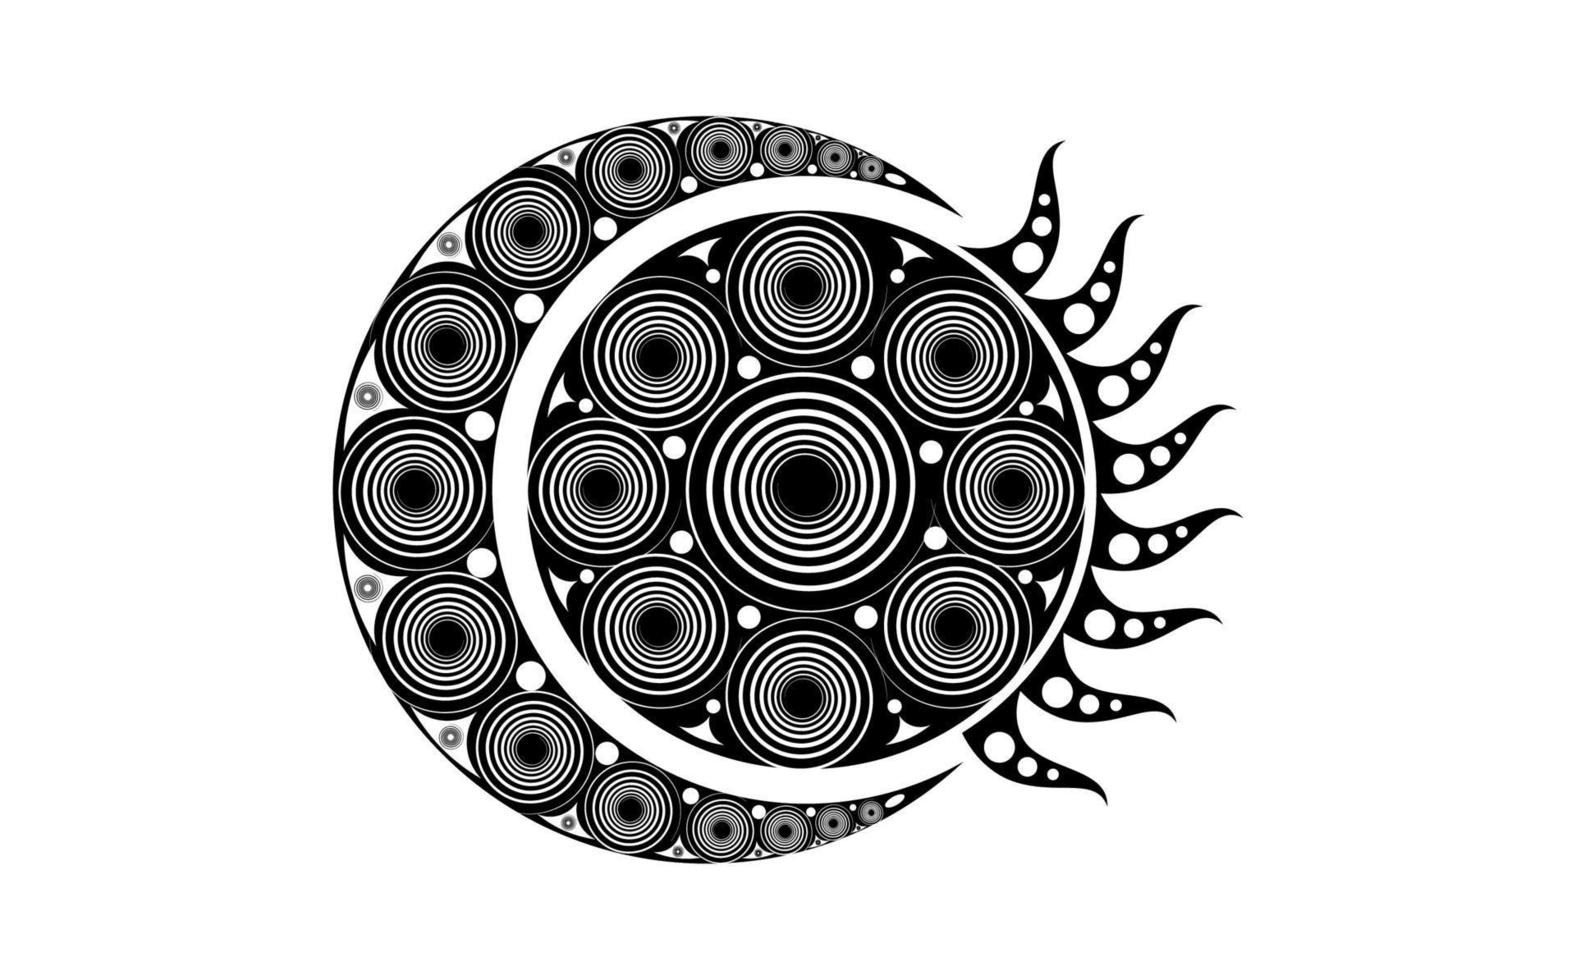 Spiral Celtic Moon and Celtic Sun, esoteric and occult signs, crescent moon pattern, esoteric radiant sun, vector illustration isolated on white background